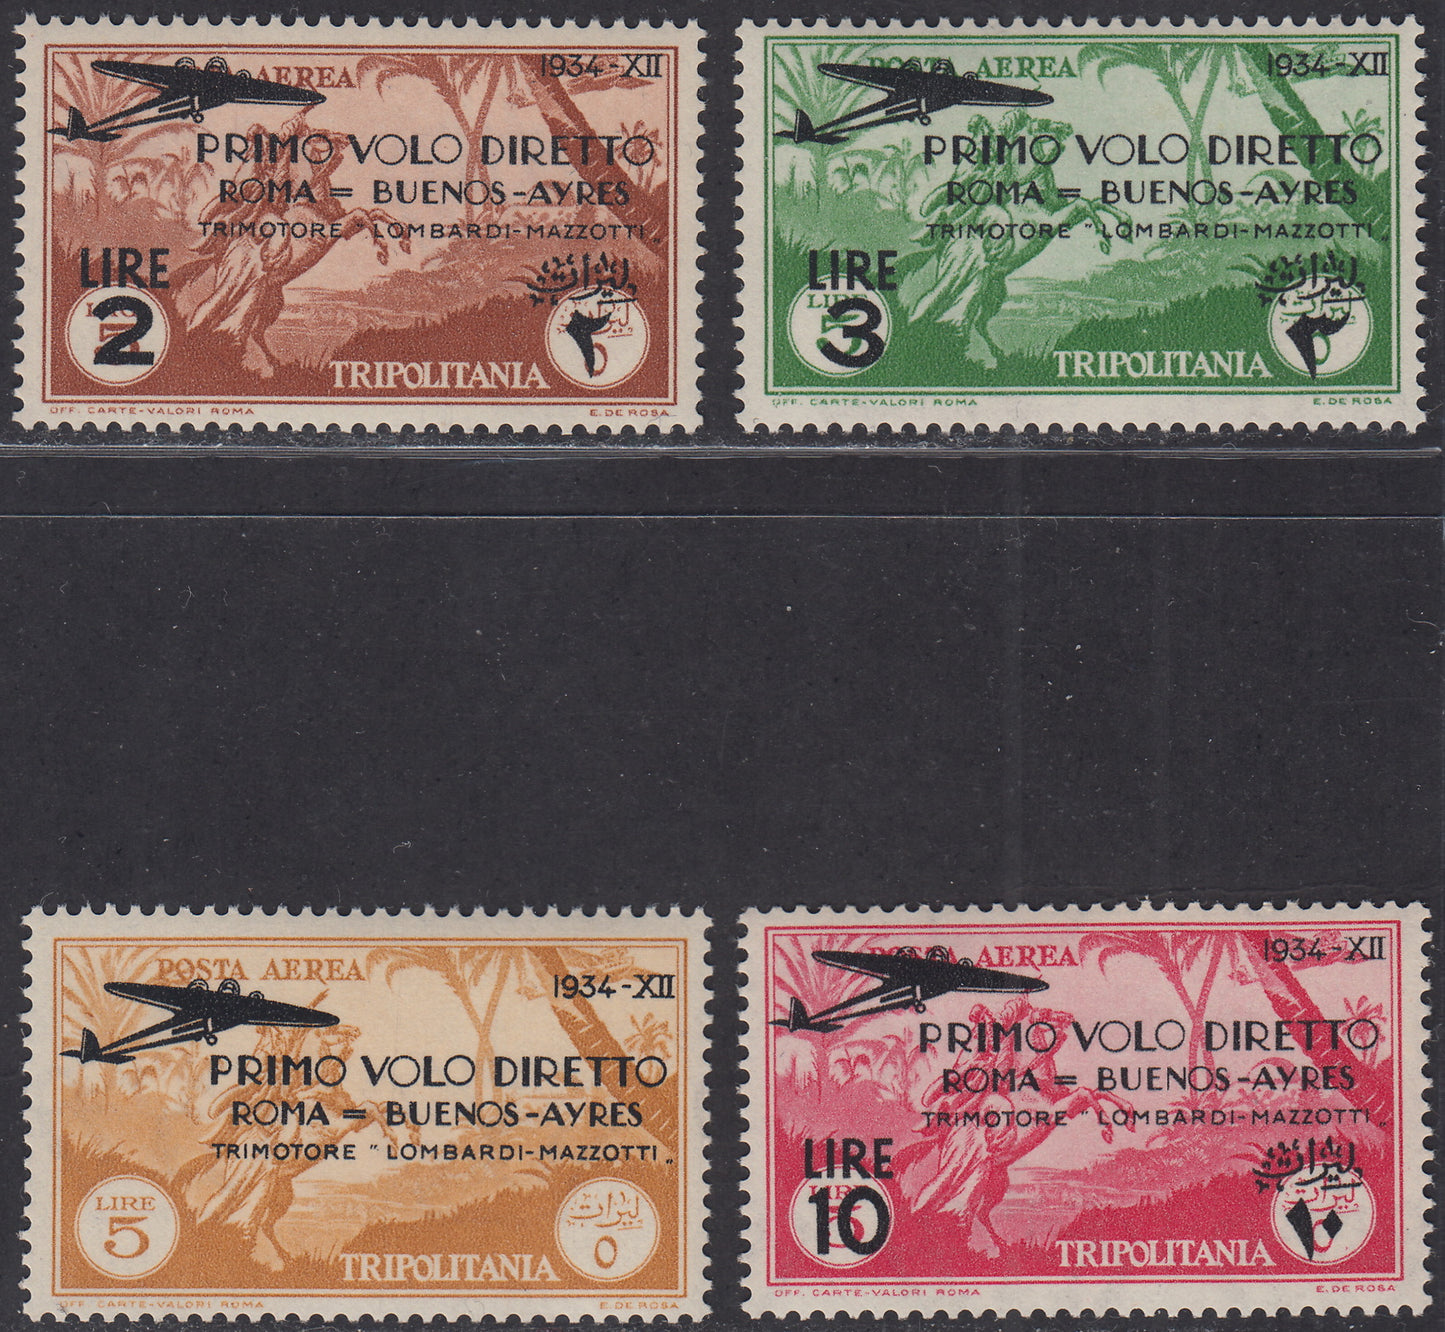 Trip26 - 1934 - Rome - Buenos Aires flight, complete set of 4 new values ​​with intact rubber (A30/33)